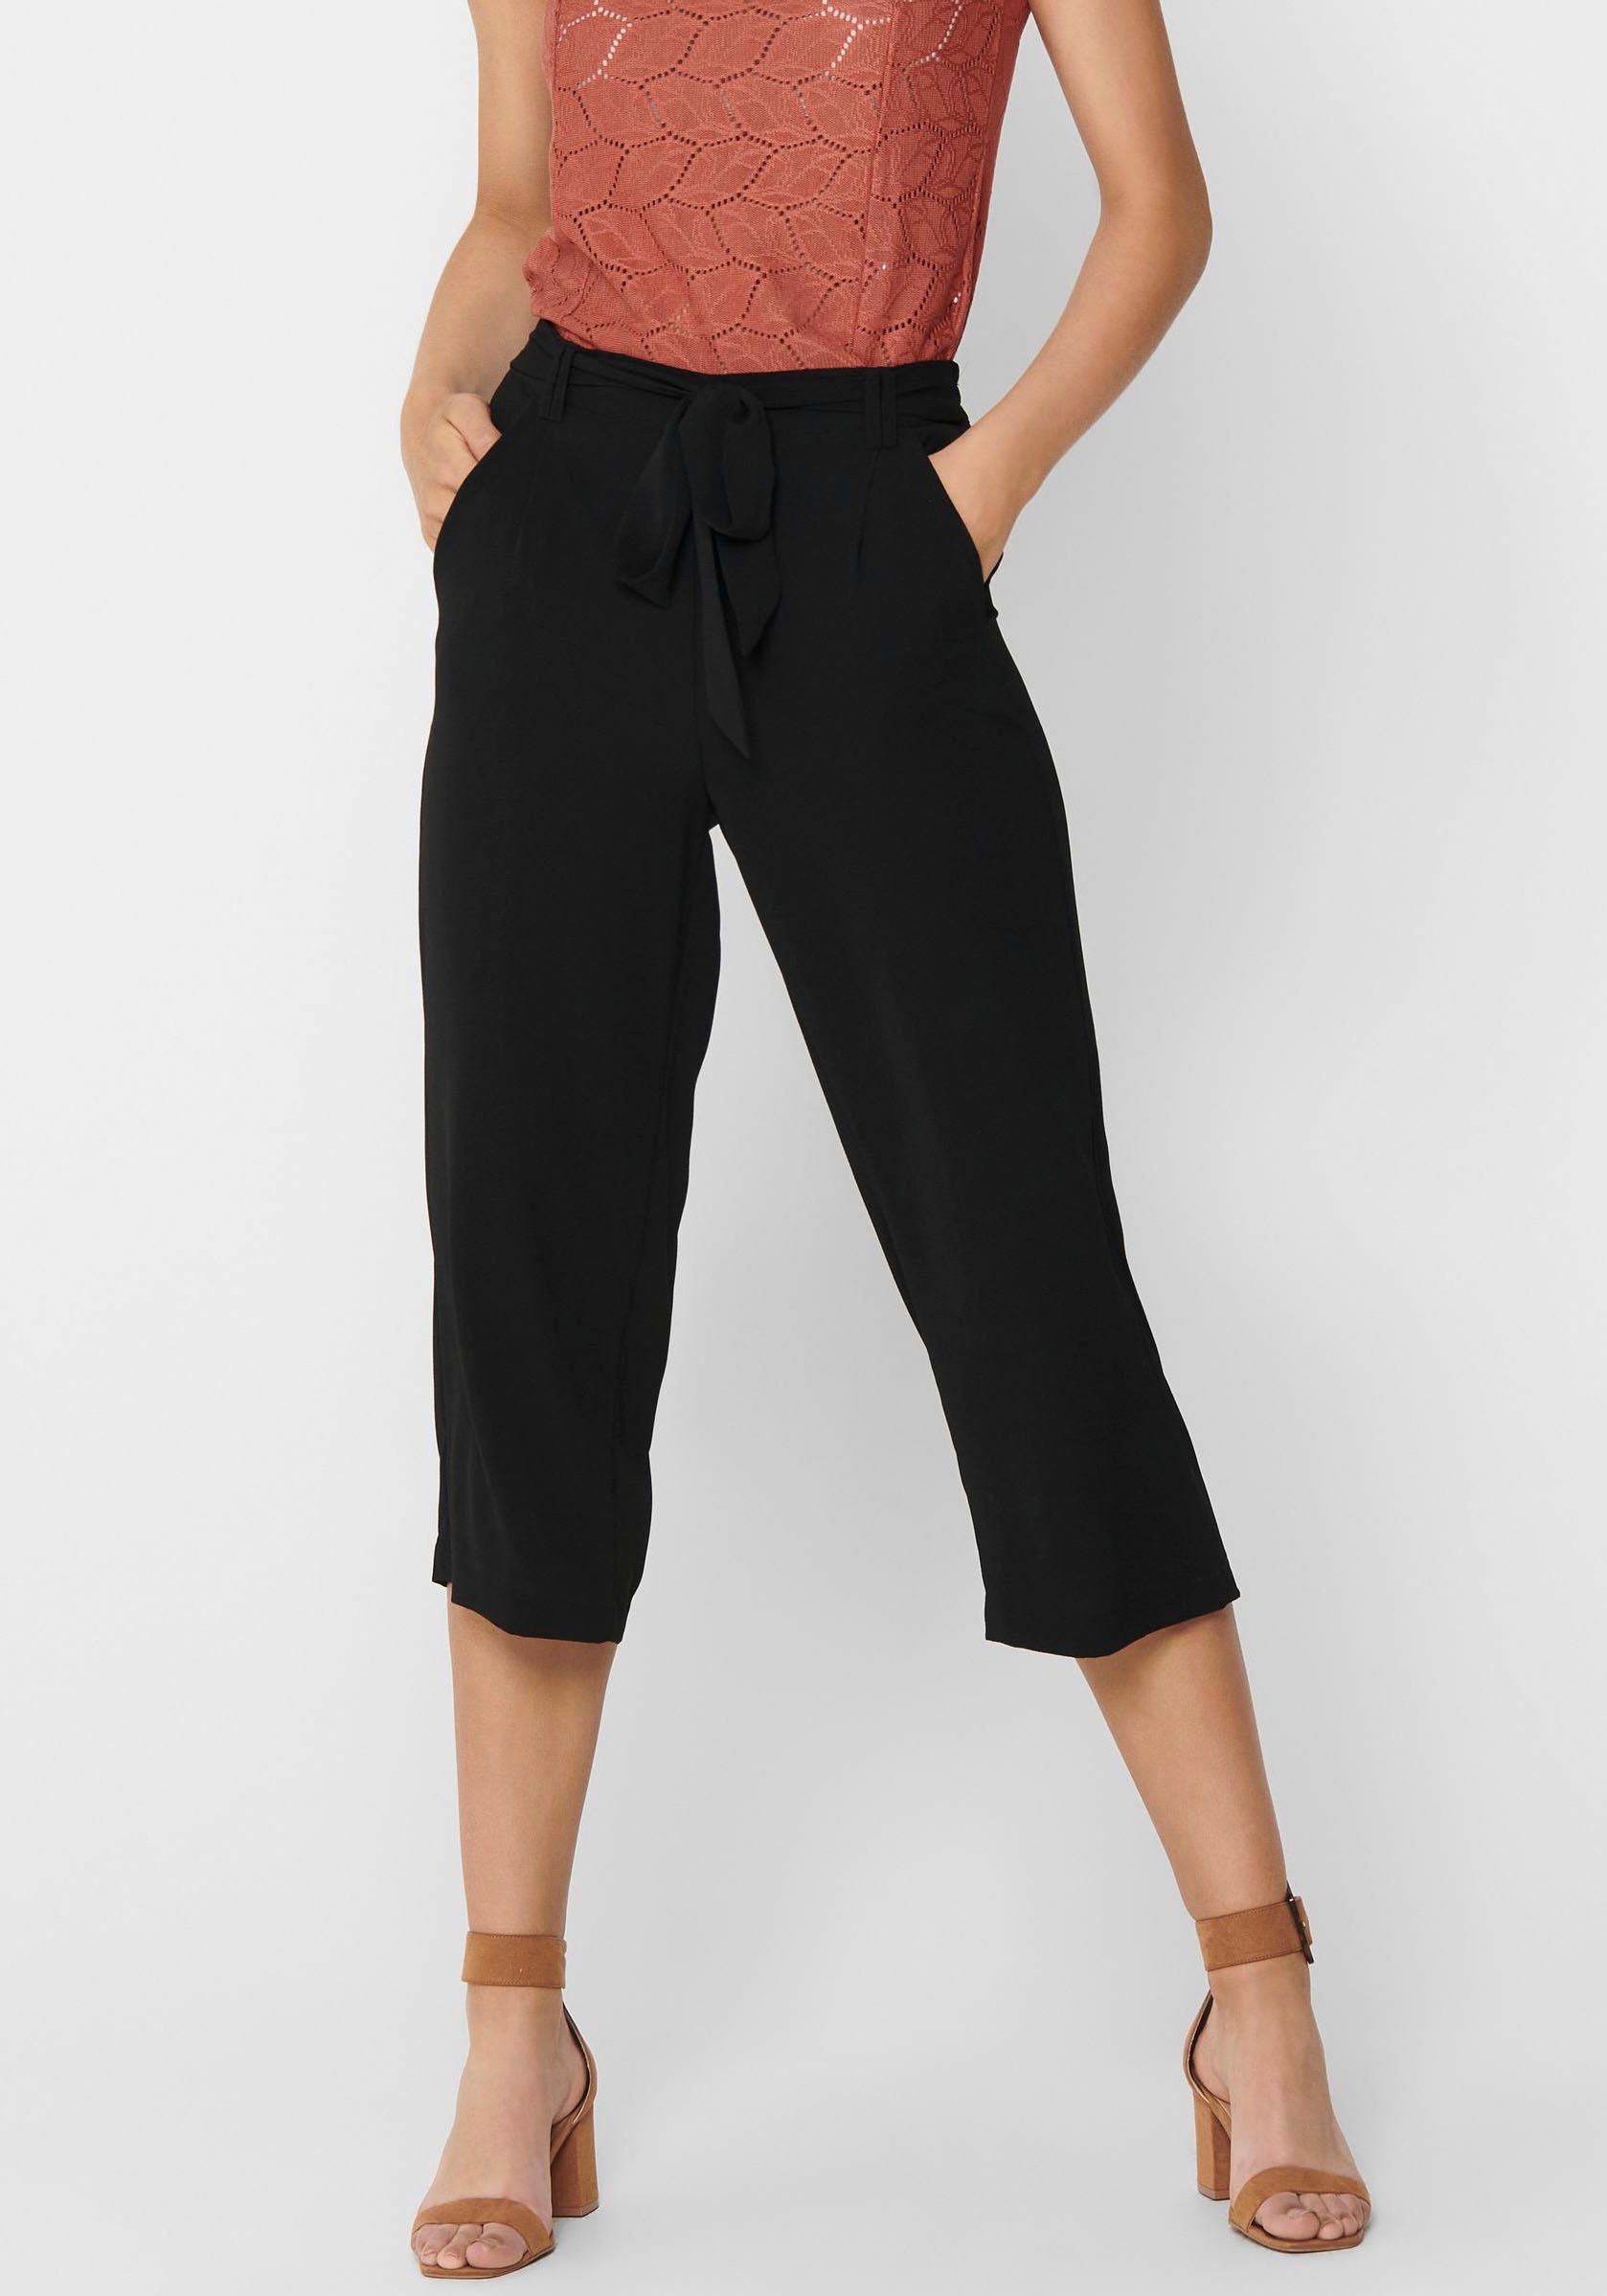 ONLY Palazzohose »ONLWINNER PALAZZO CULOTTE PANT NOOS PTM«, in uni oder gestreiftem Design-Only 1